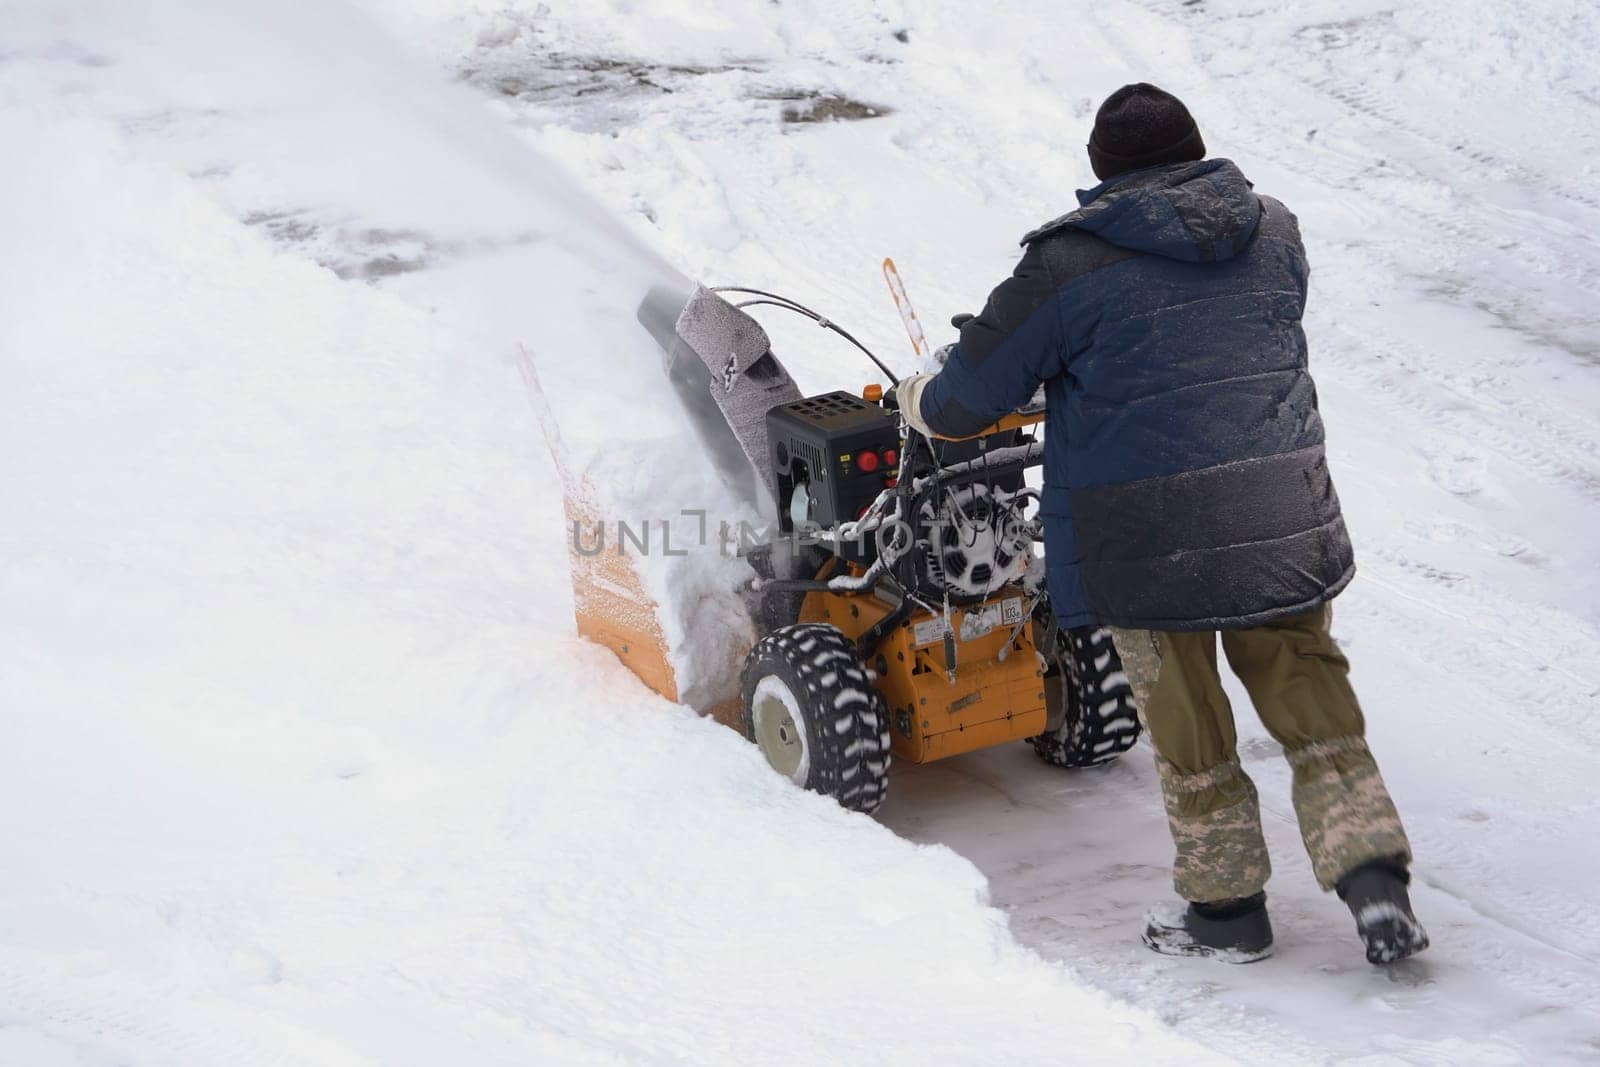 KAMCHATKA, RUSSIA - DEC 28, 2023: Man using snow blower to remove snow after winter storm. He is assisted by a snow thrower on a winter road. Man with snow blower on winter road after blizzard